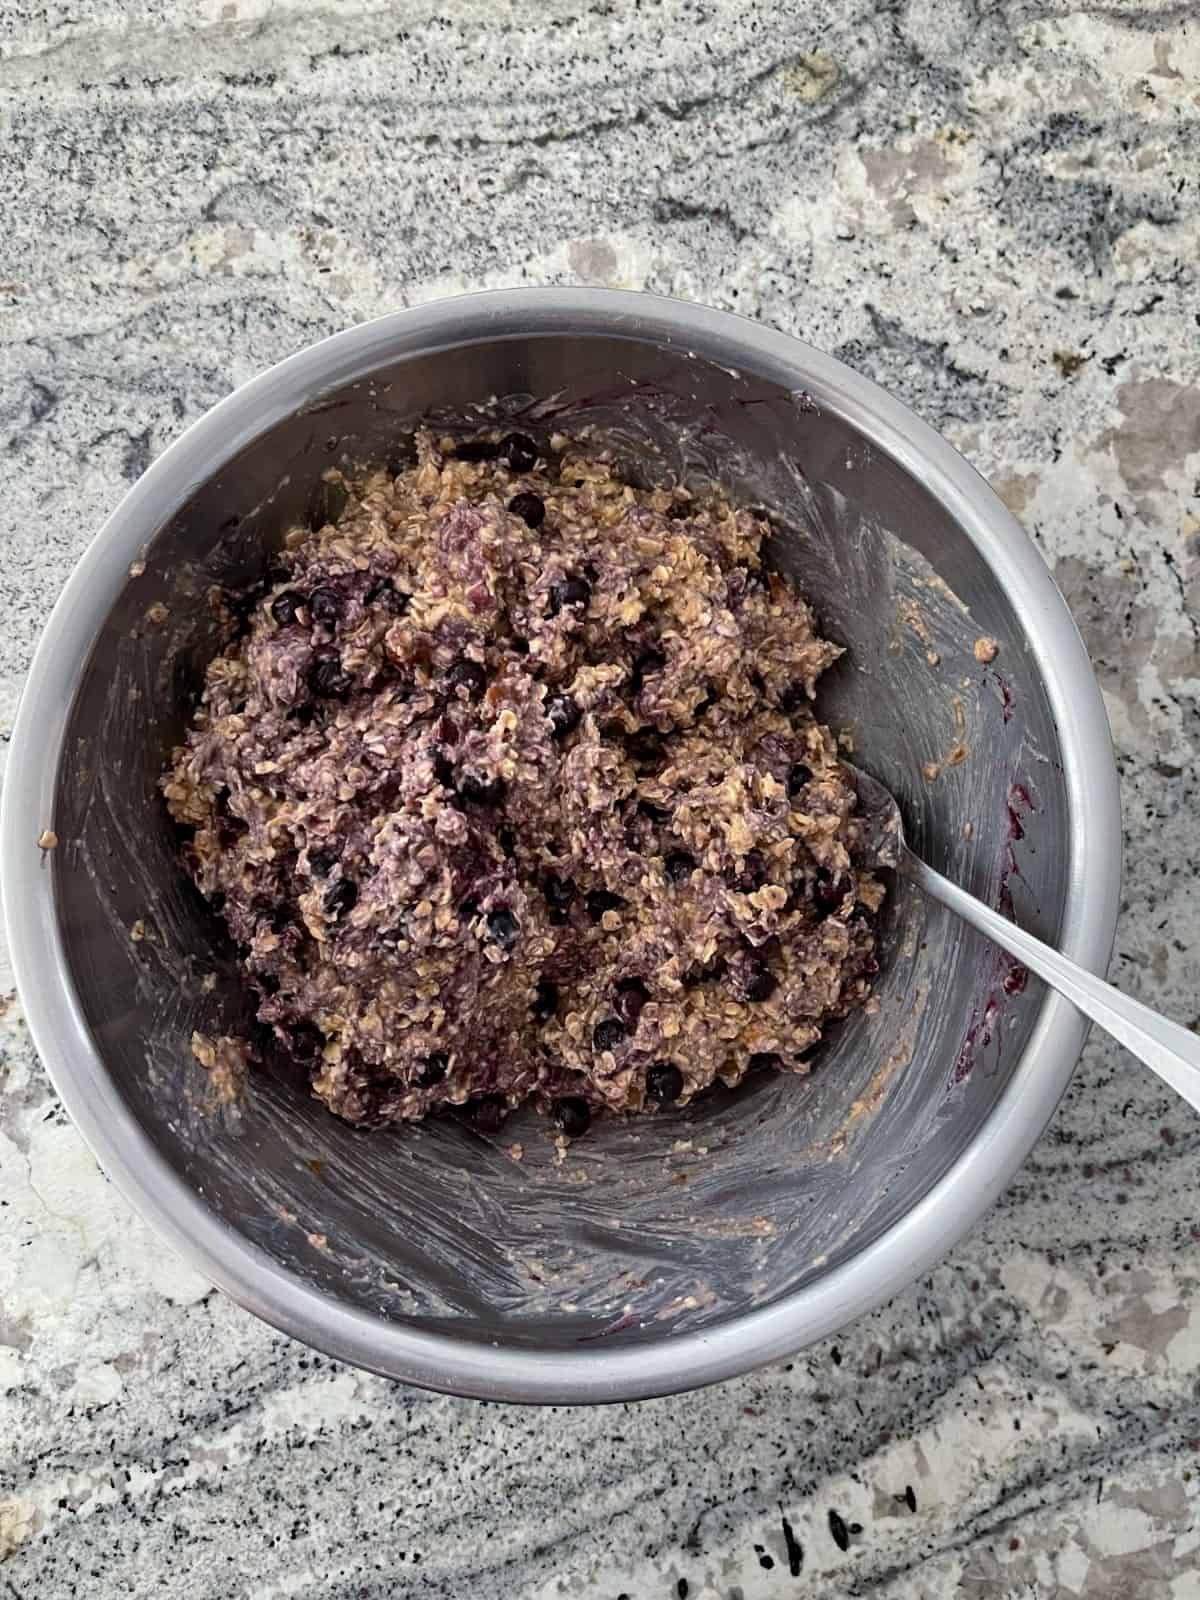 Mixing the blueberry banana oat batter in stainless bowl on granite counter.